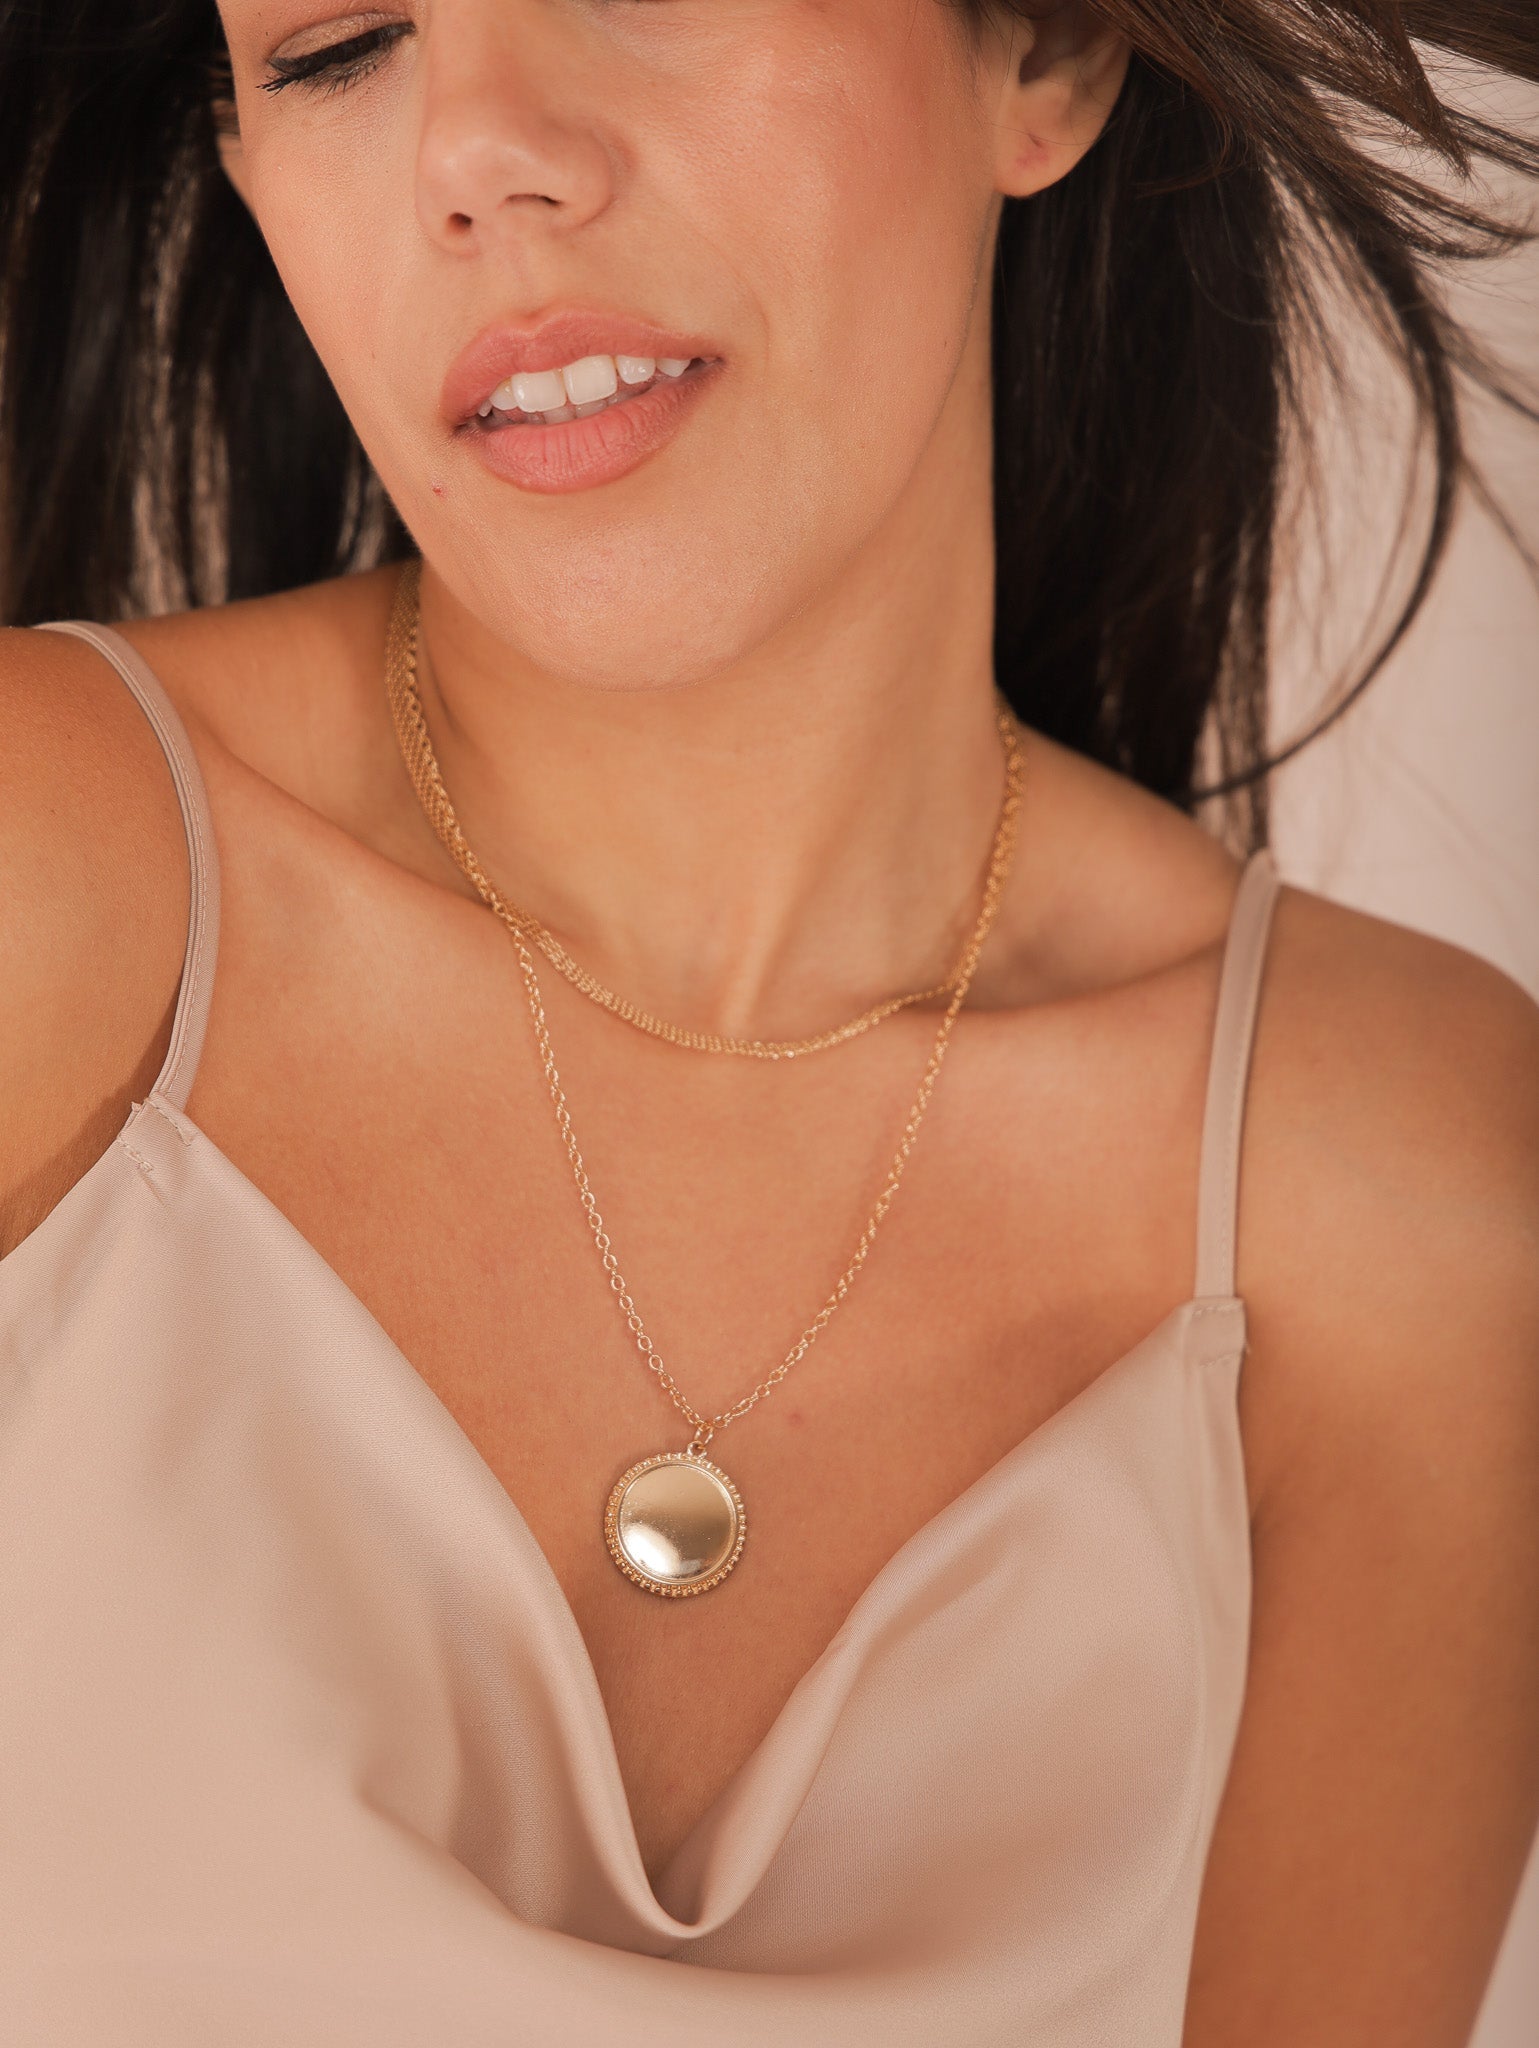 Molly Green - One More Layered Necklace - Jewelry